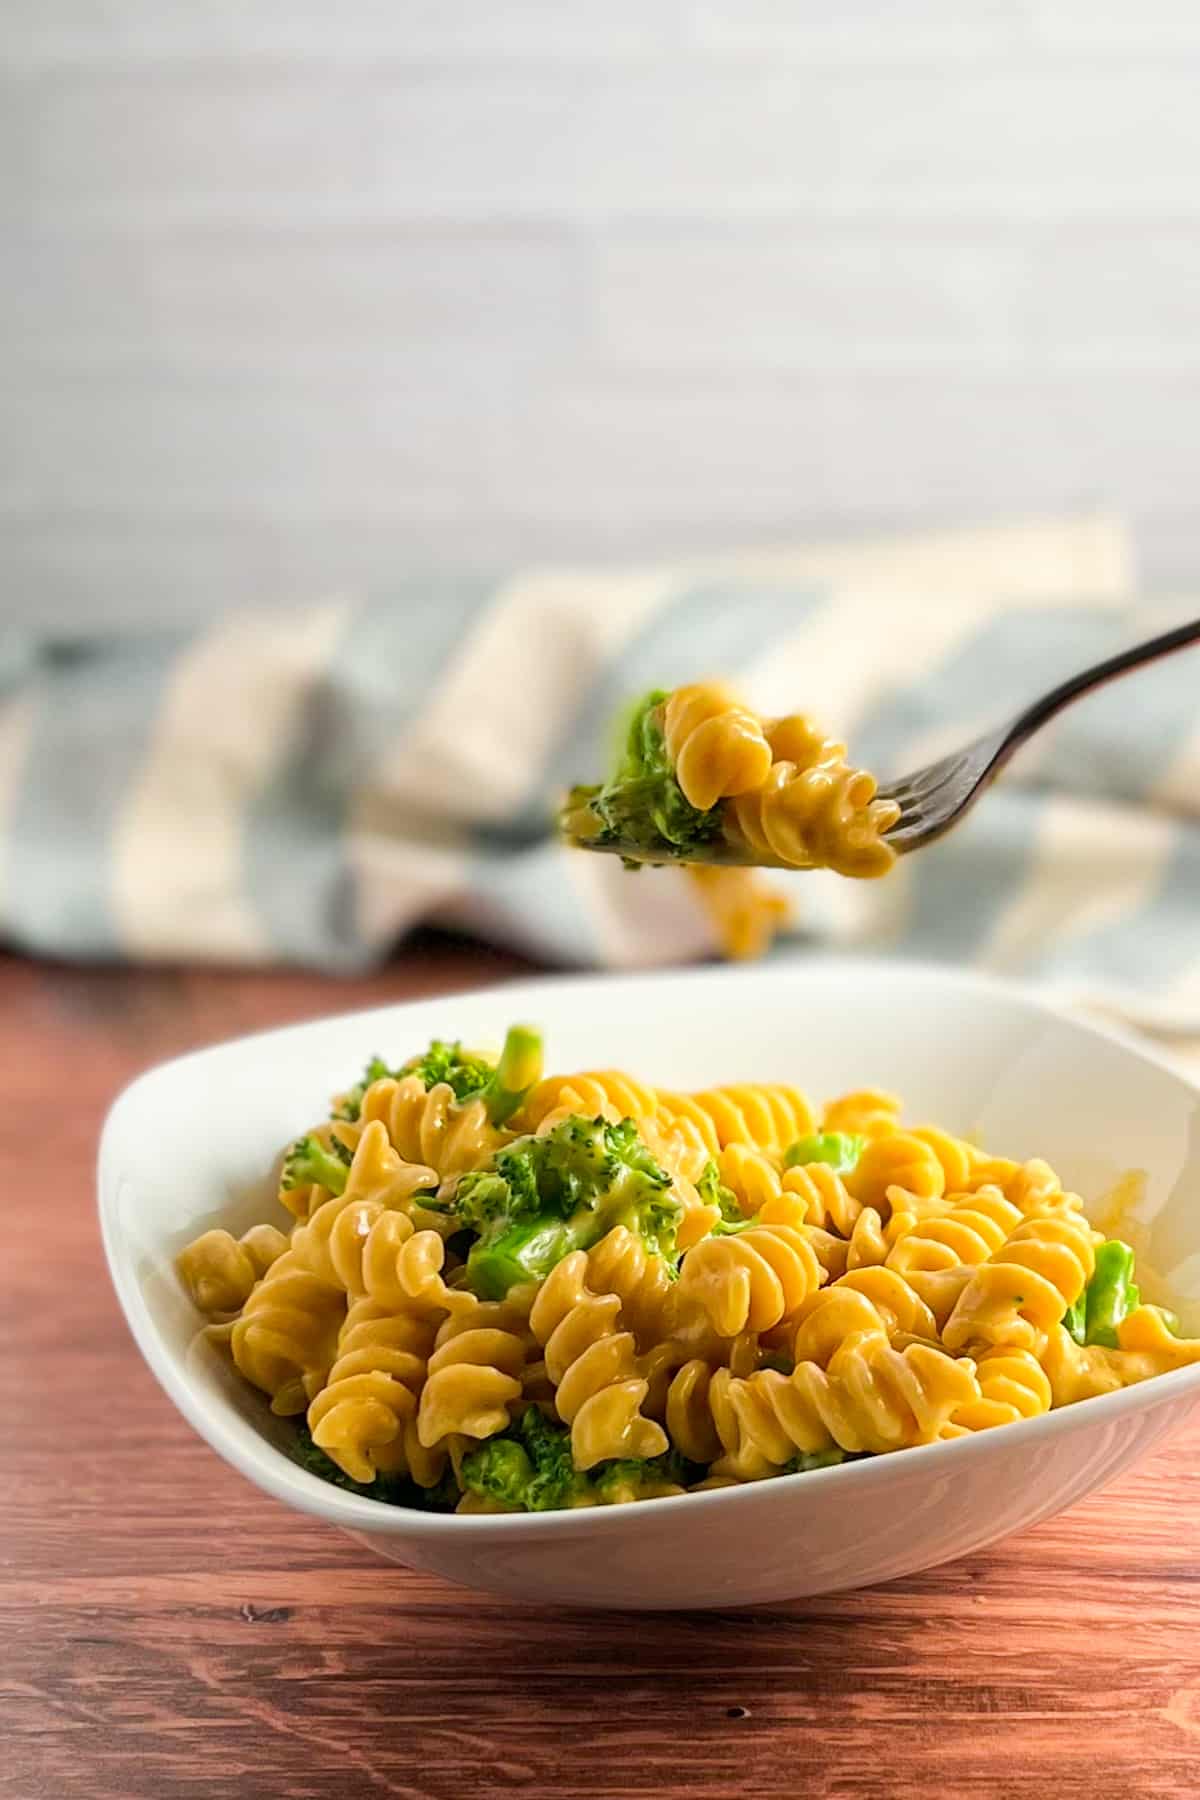 side view of vegan mac and cheese in a white bowl on a wood surface with a fork suspended above the bowl. blue and white striped napkin blurred in the background